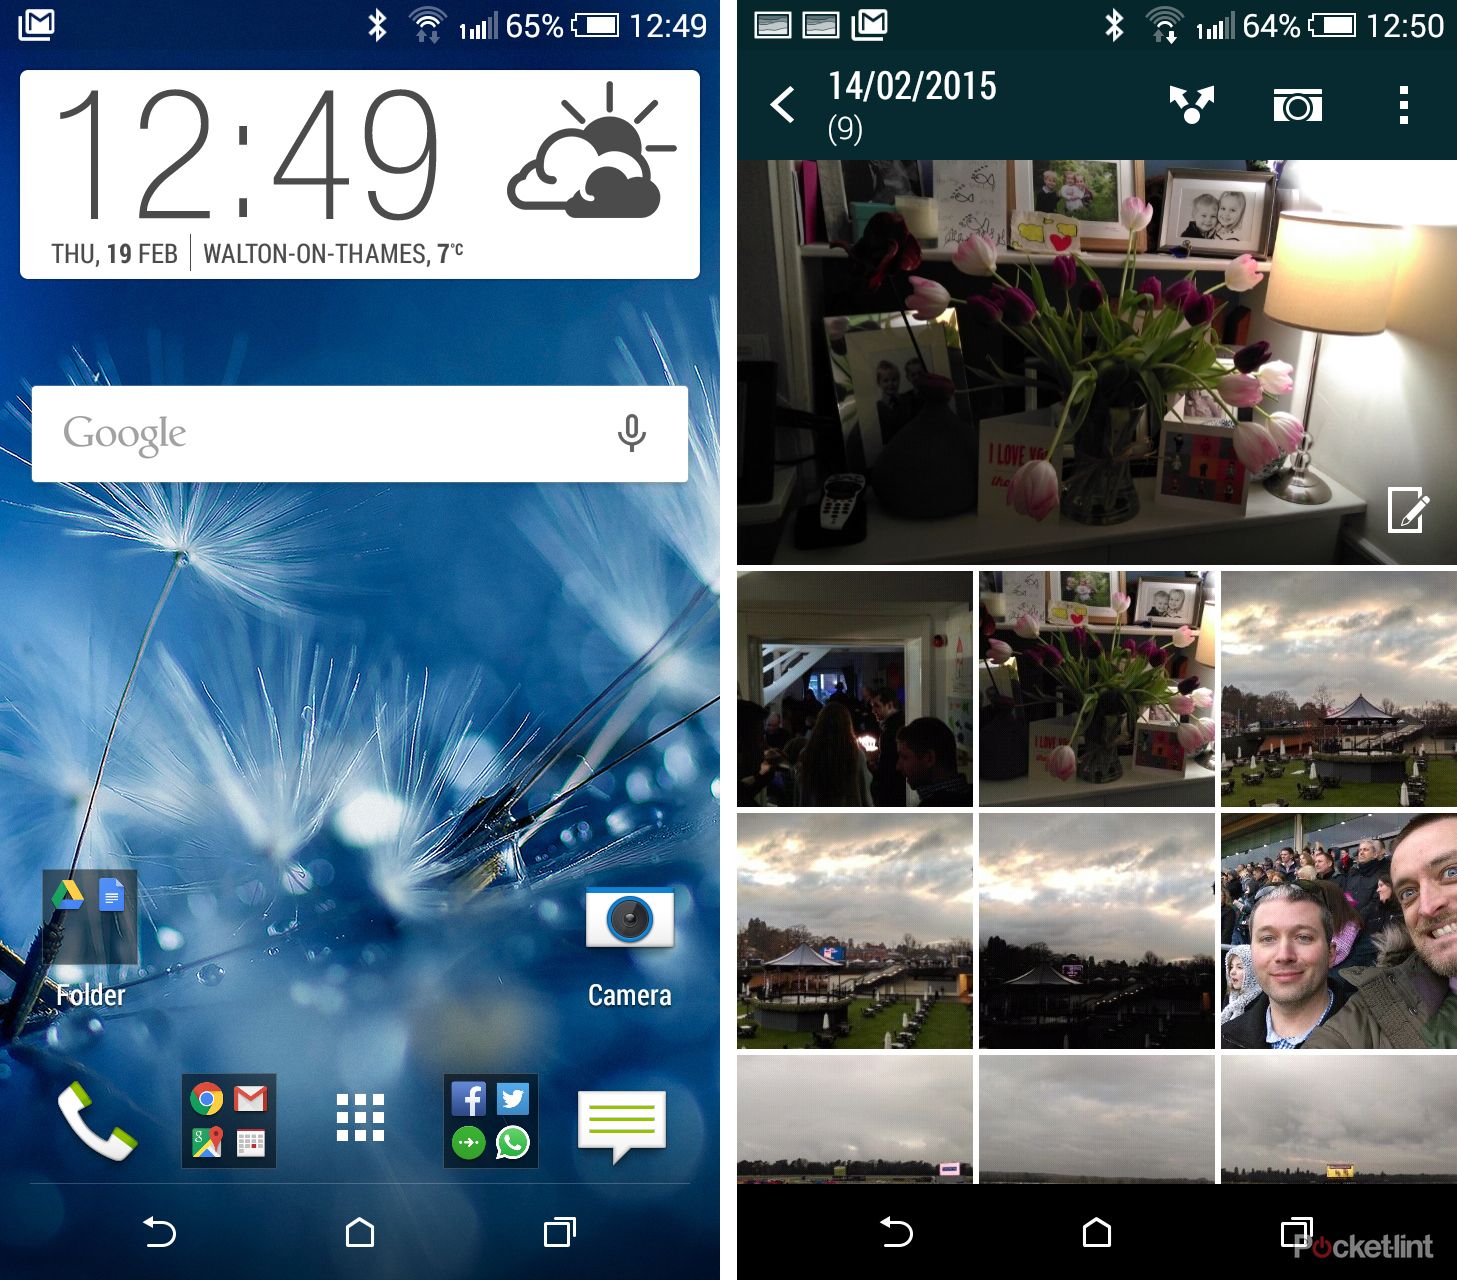 htc desire 820 review image 20